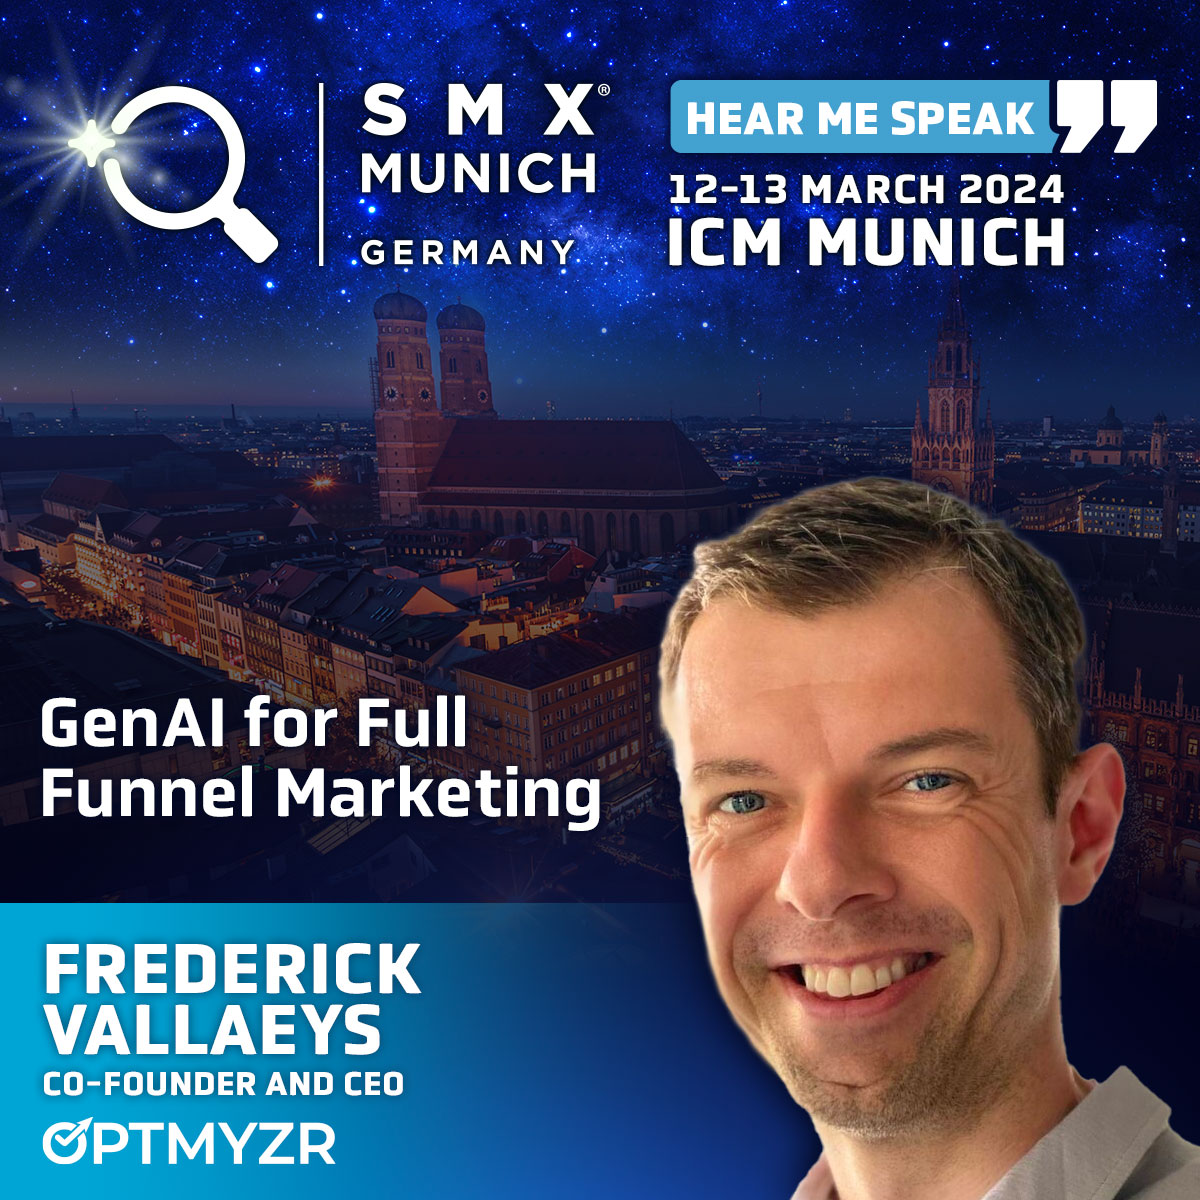 Discover GenAI beyond ads with Fred, leveraging it for audience building, data signals, and creative optimization. ow.ly/59ut50QzbTT #smx #GenerativeAI #funnelmarketing